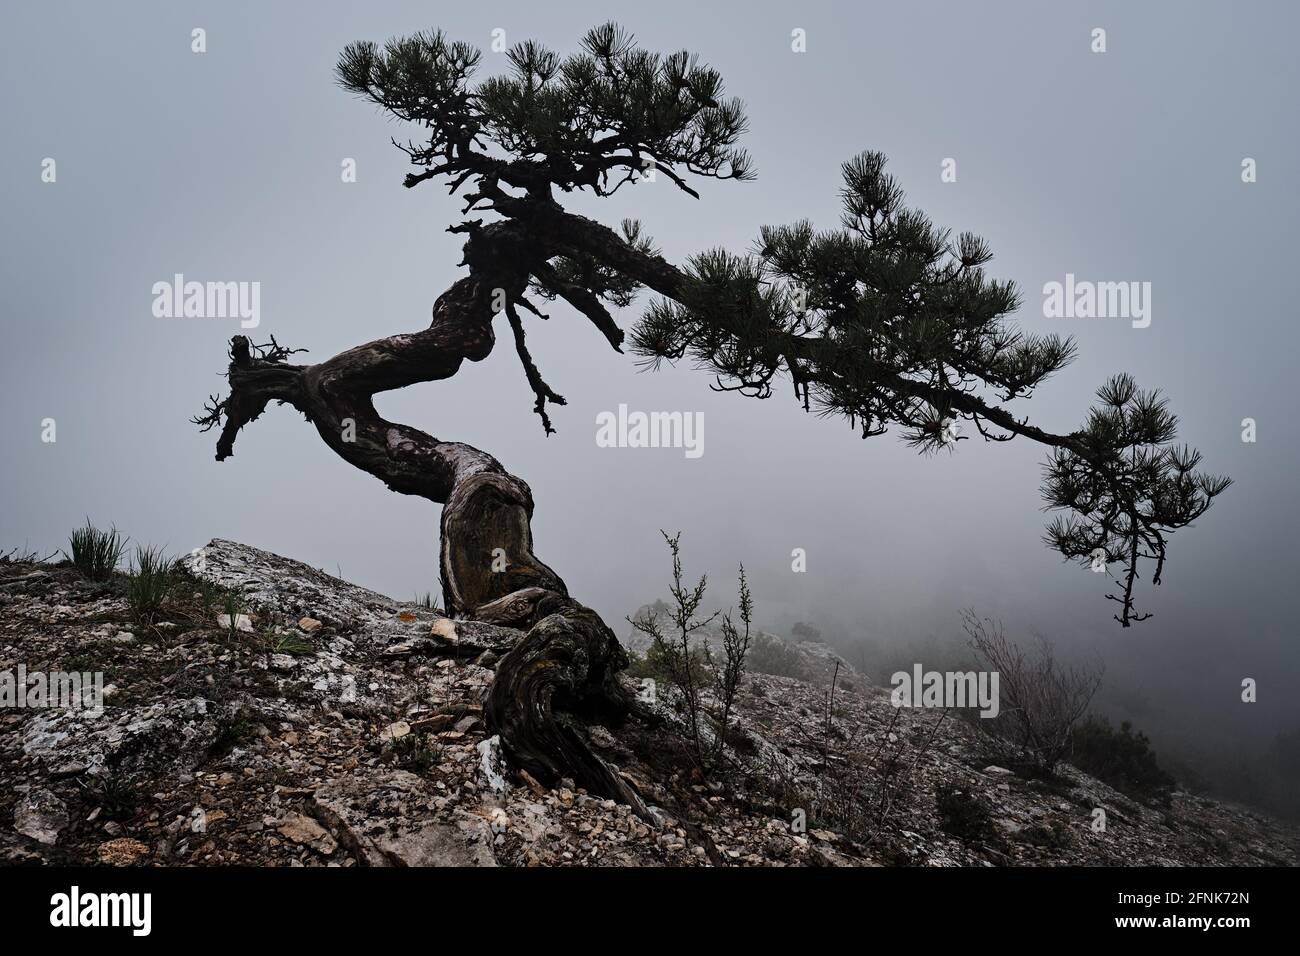 Ancient Old Twisted Juniper Tree With Foggy Background On Mountain Stock Photo